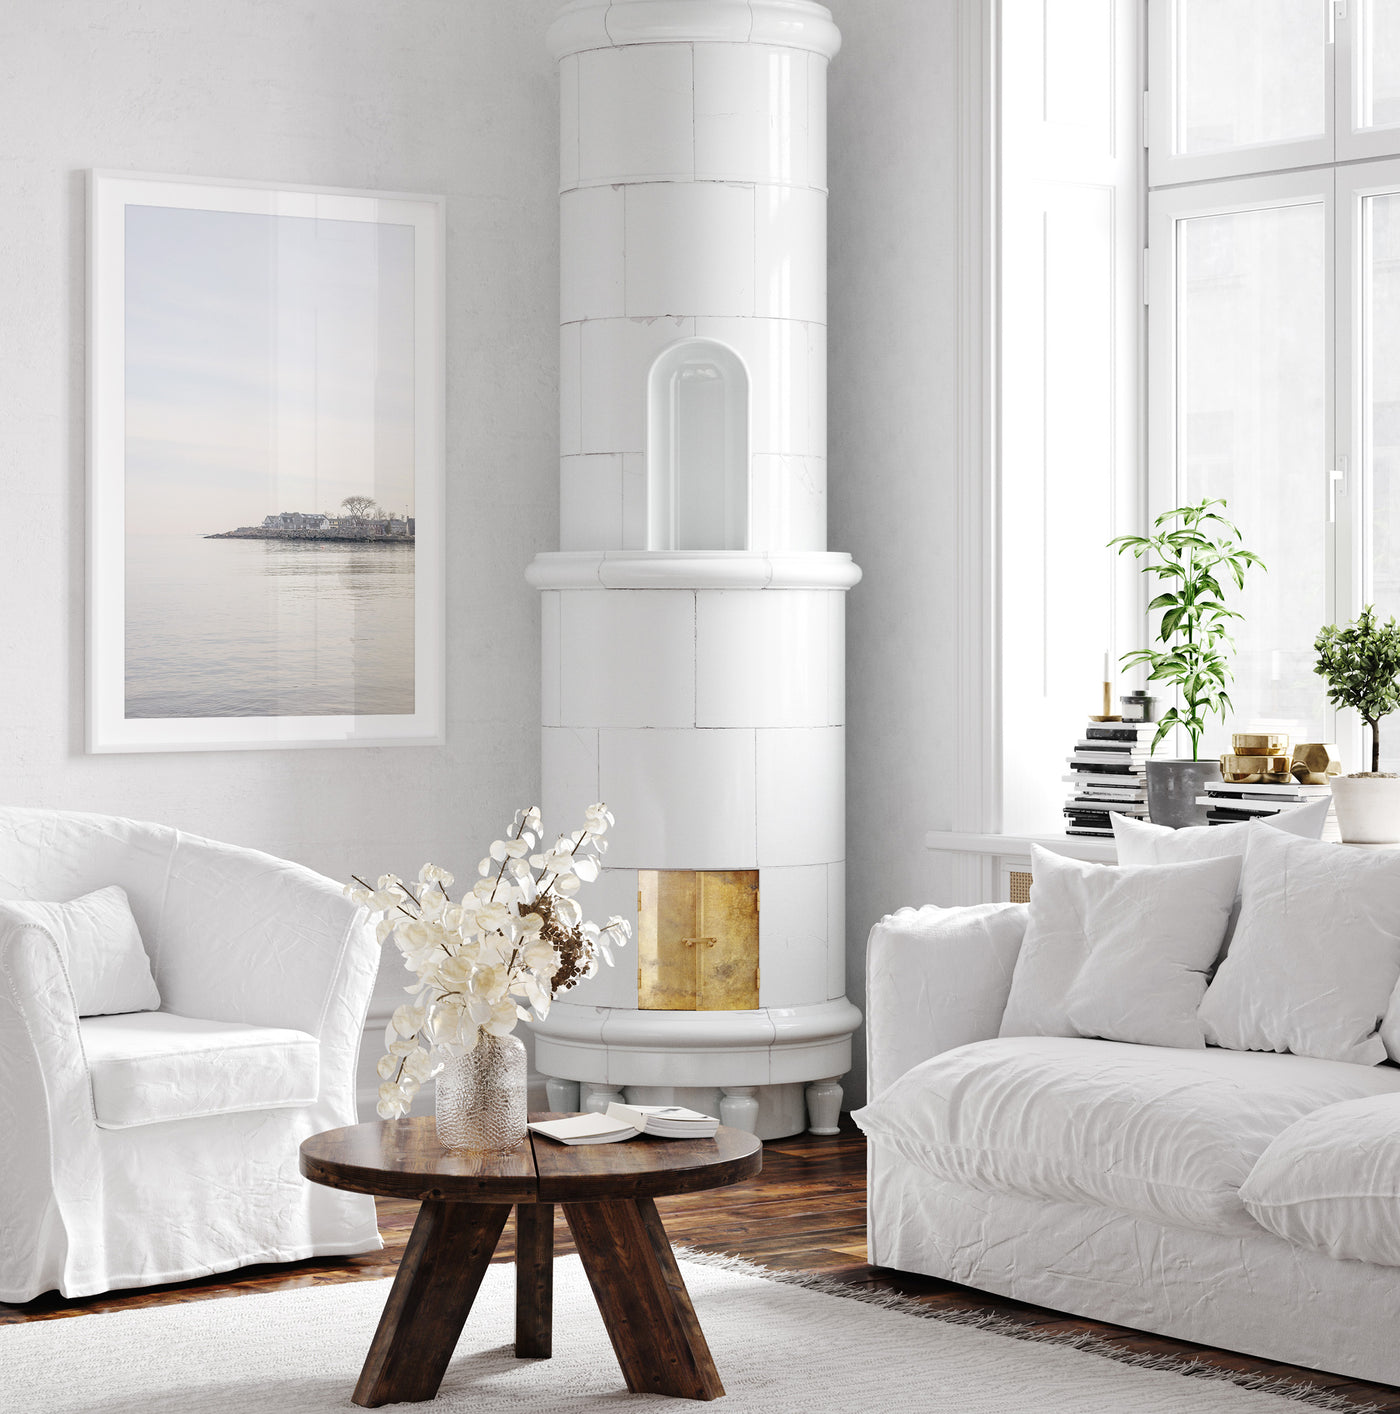 Calm wall art by Cattie Coyle Photography: Rockport, MA, in living room